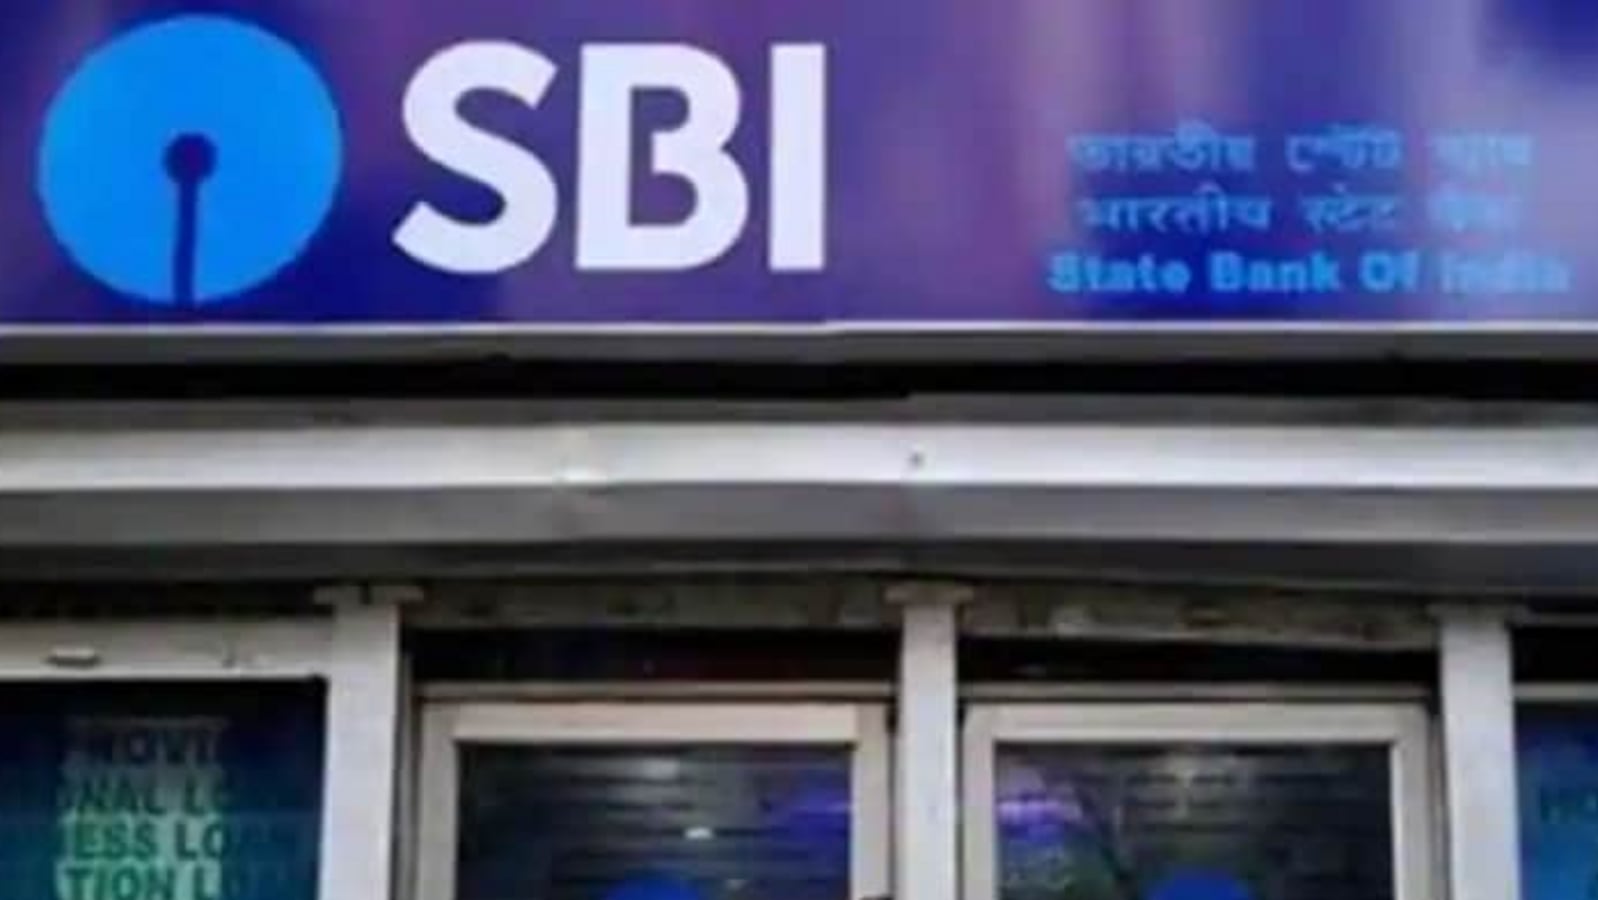 Sbi Hikes Mclr By Up To 15 Basis Points Across Tenors Hindustan Times 6894